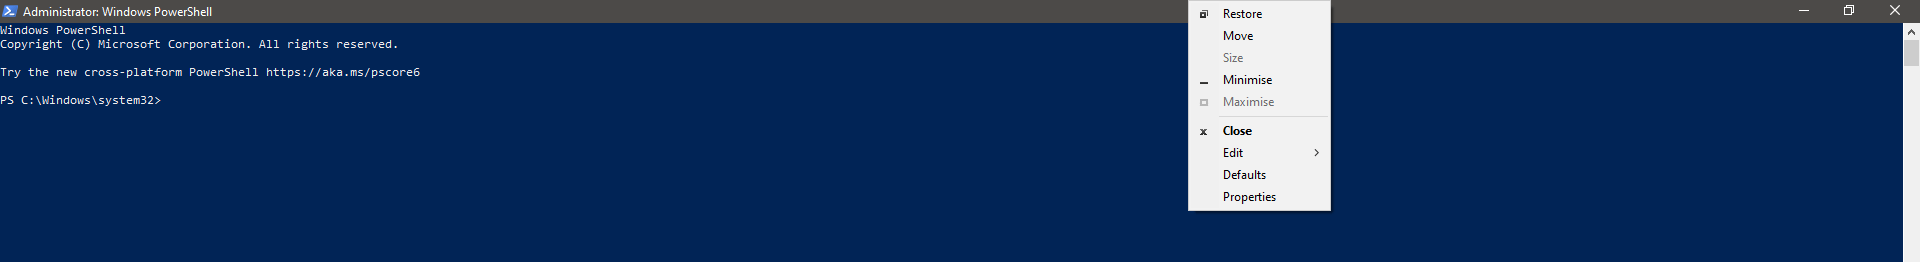 How to display PowerShell menu using short cut instead of right click? Ps look at the Image a90d46c4-7055-4dbd-b490-5aca7ecbc036?upload=true.png